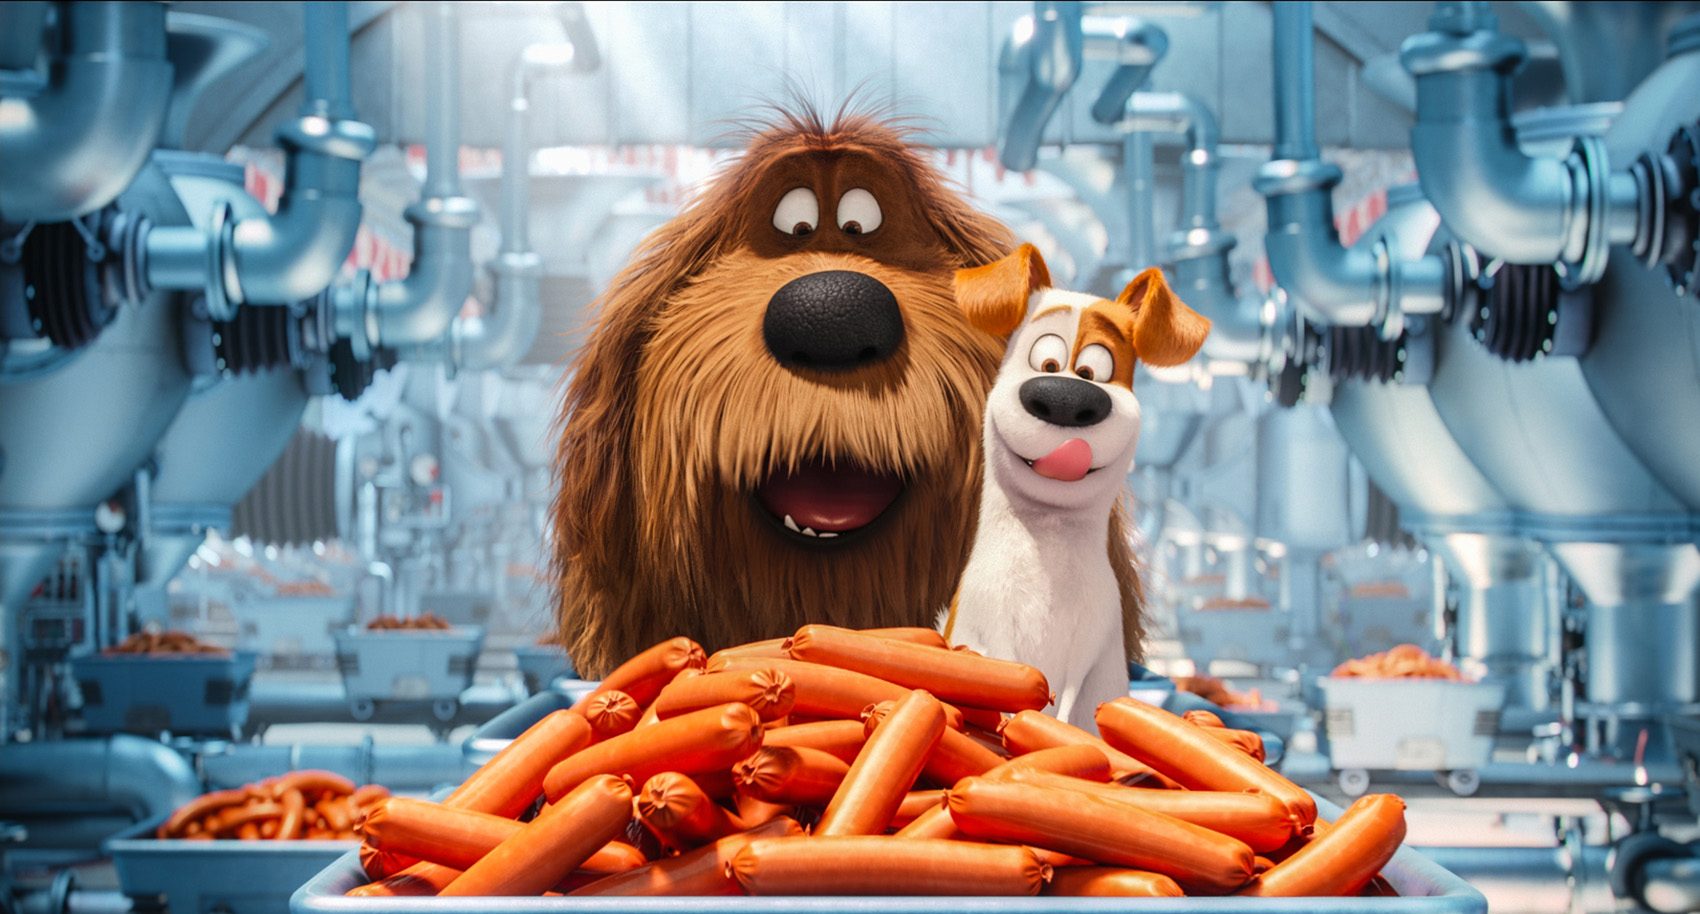 ‘The Secret Life of Pets’ review: Fun distraction